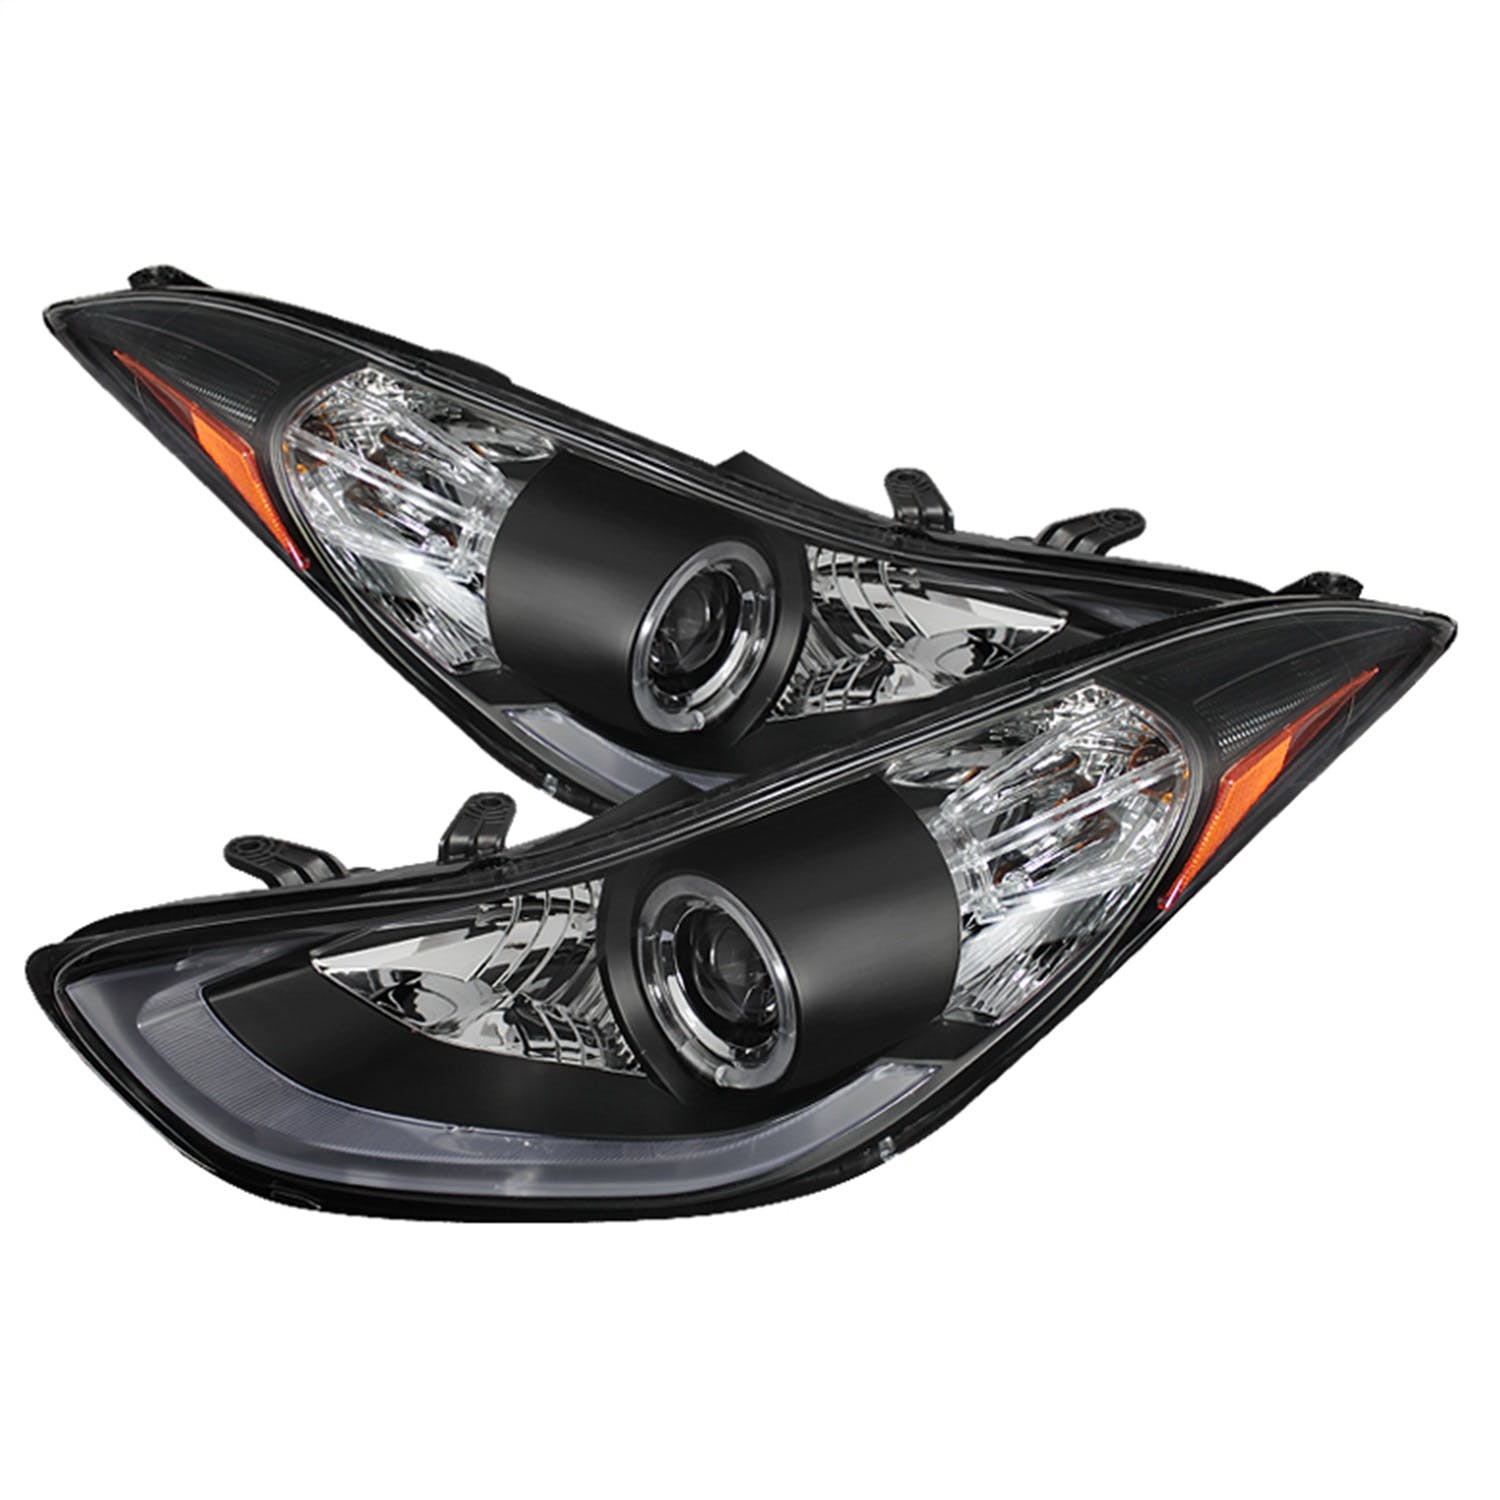 Spyder Auto 5073662 (Spyder) Hyundai Elantra 11-13 Projector Headlights (Not compatible with the GT